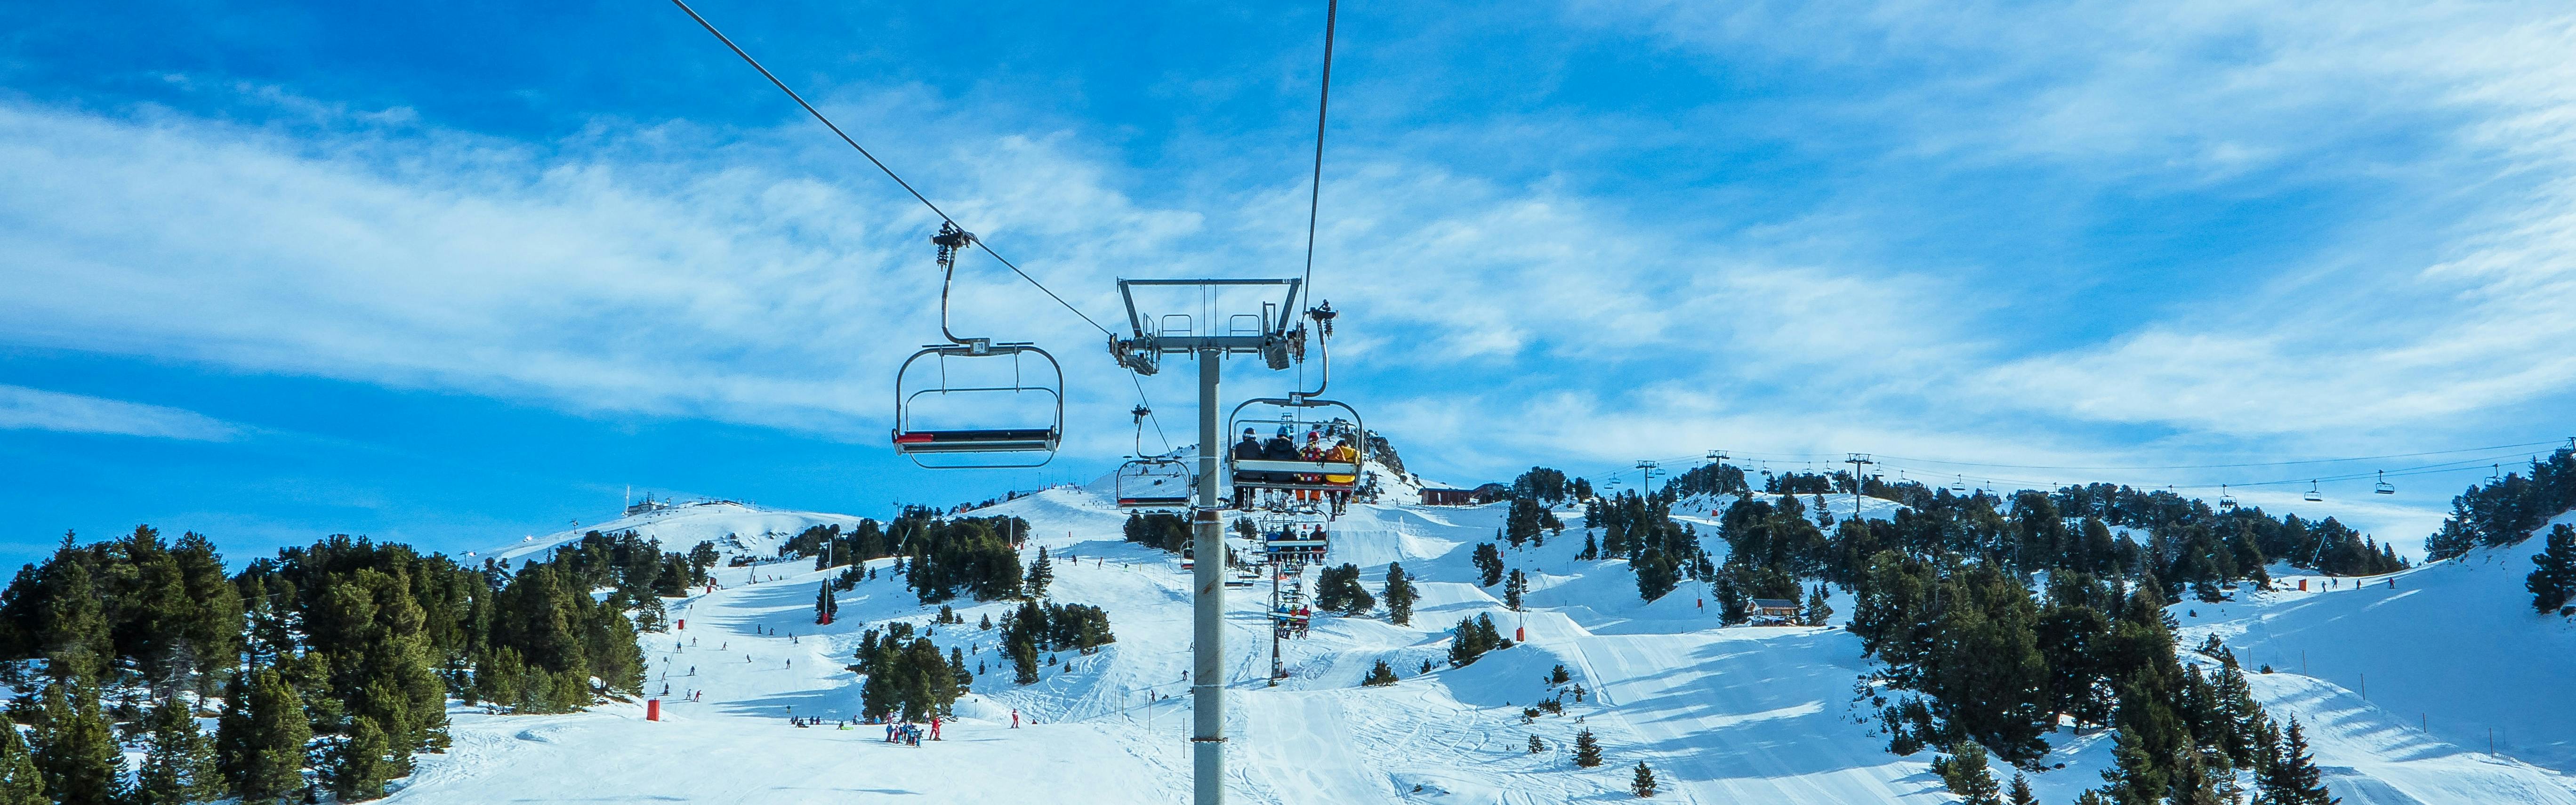 A chair lift against a blue sky and a snowy mountain